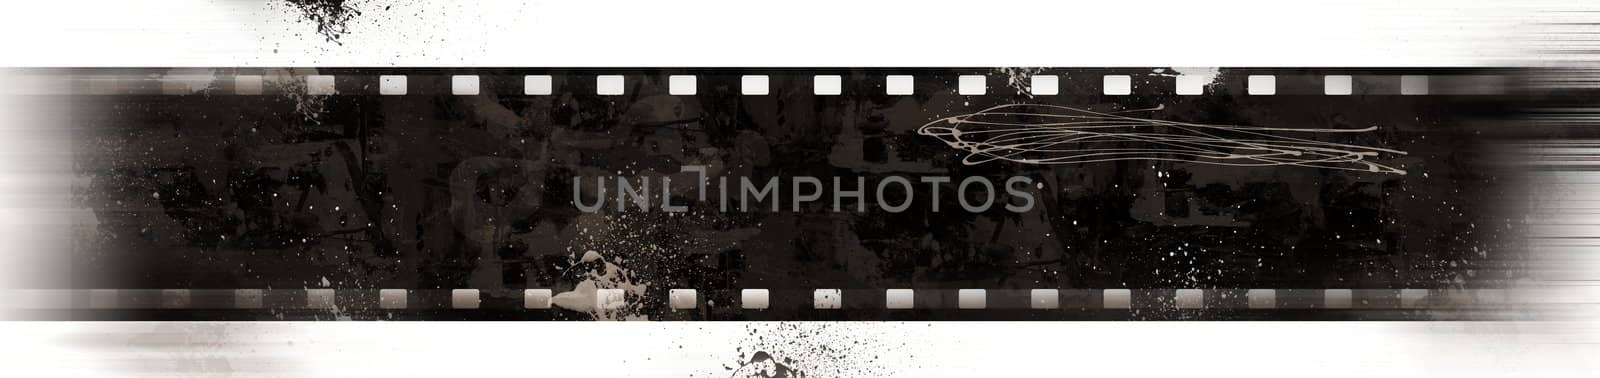 Grunge Film Frame with motion effect by Lizard